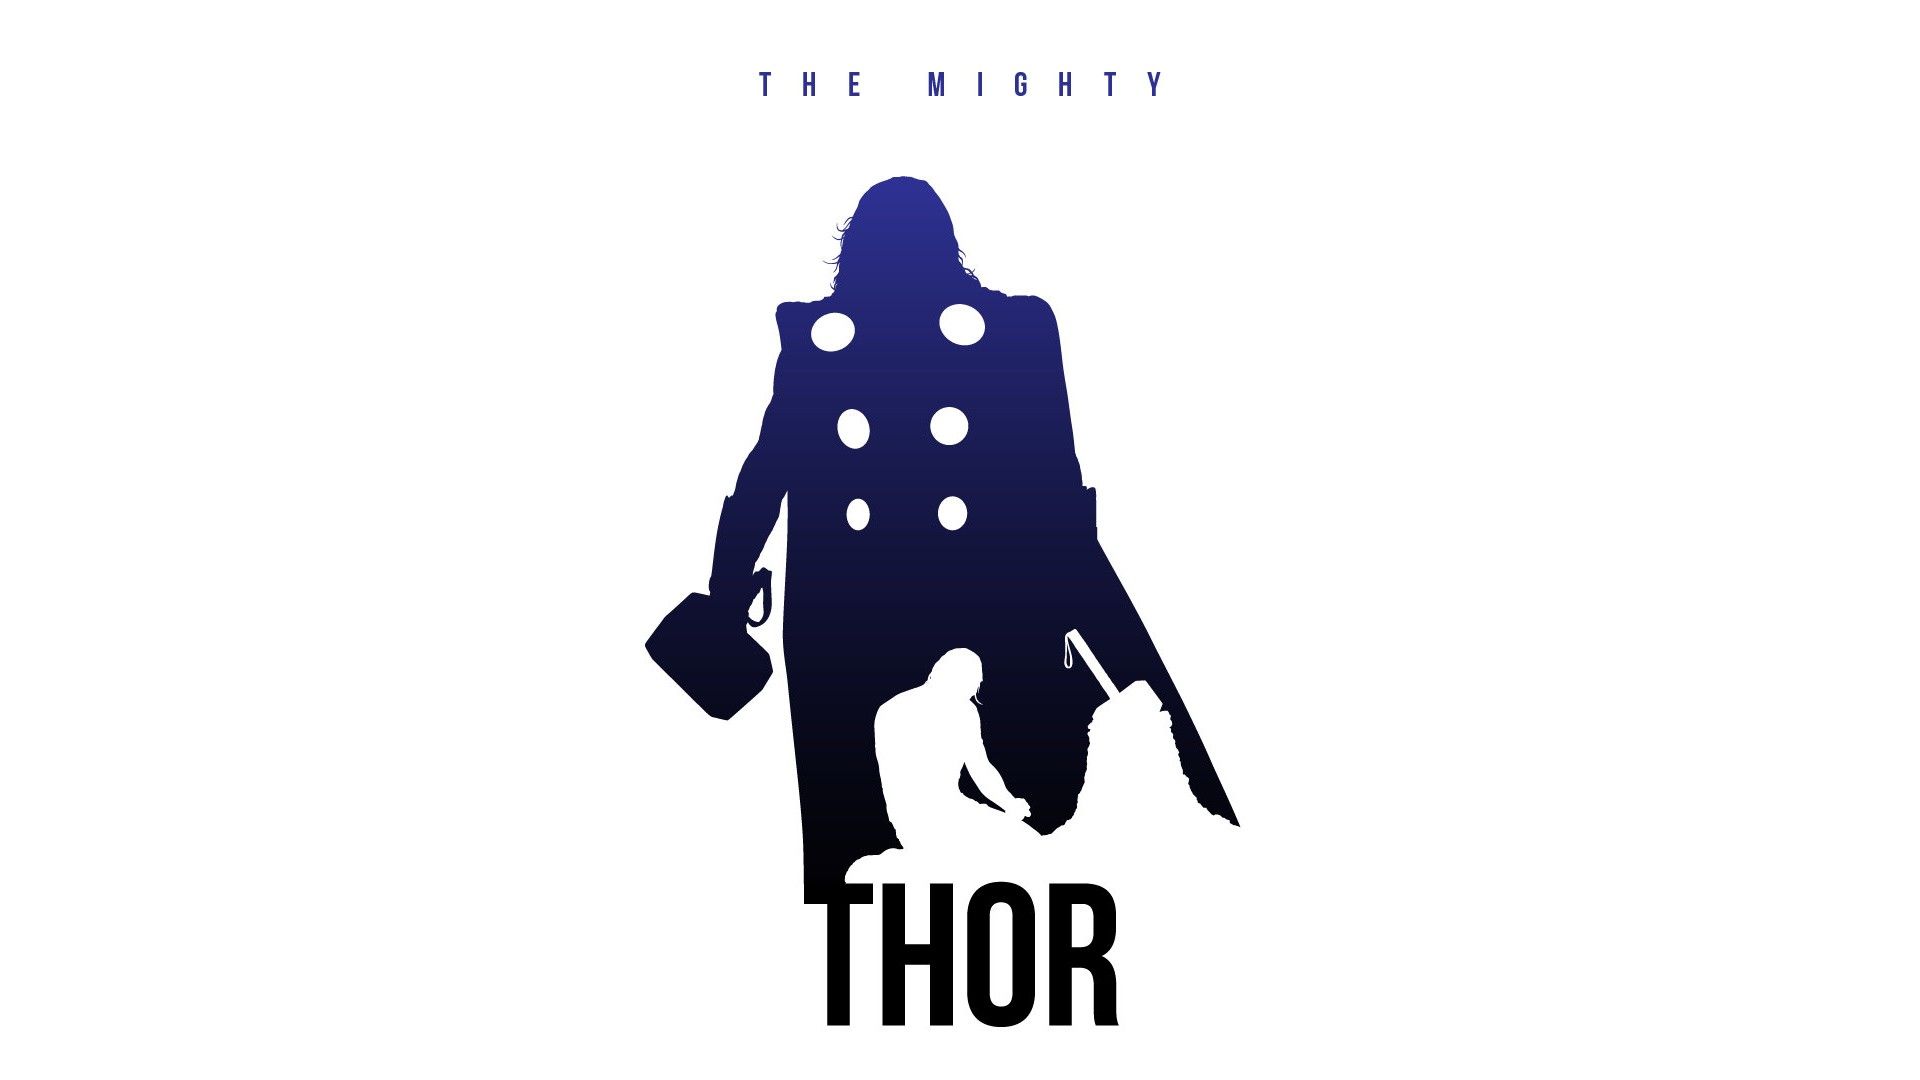 minimalistic Thor silhouette Marvel Comics The Avengers posters fan art white background / Wallbase.cc. Avengers poster, Marvel, Thor